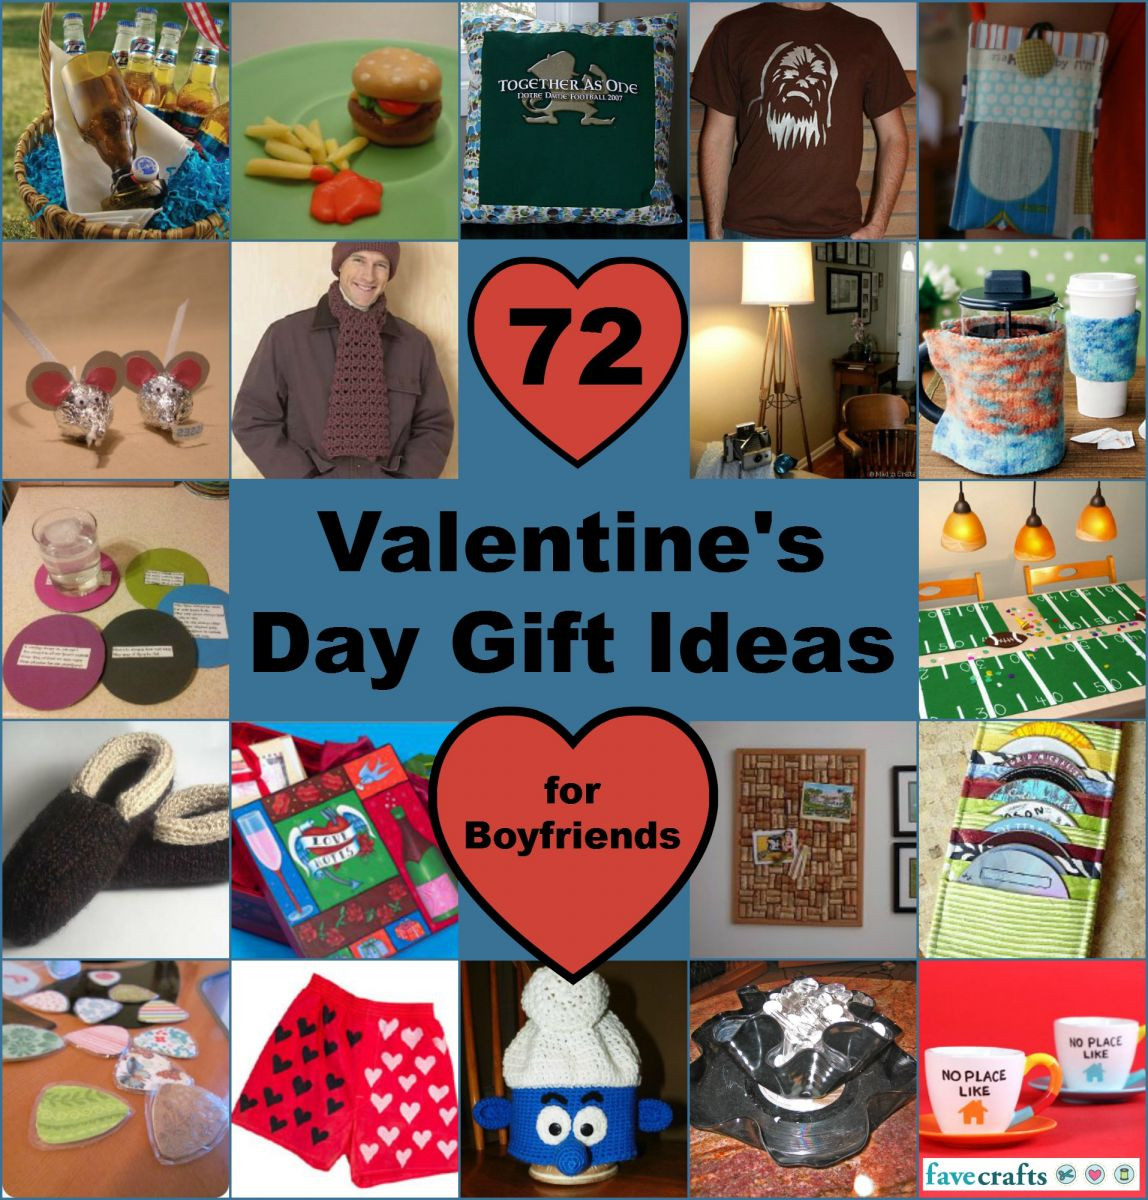 Valentines Gift Ideas For Your Boyfriend
 Top 15 Favorite Valentine s Arts and Crafts Videos and